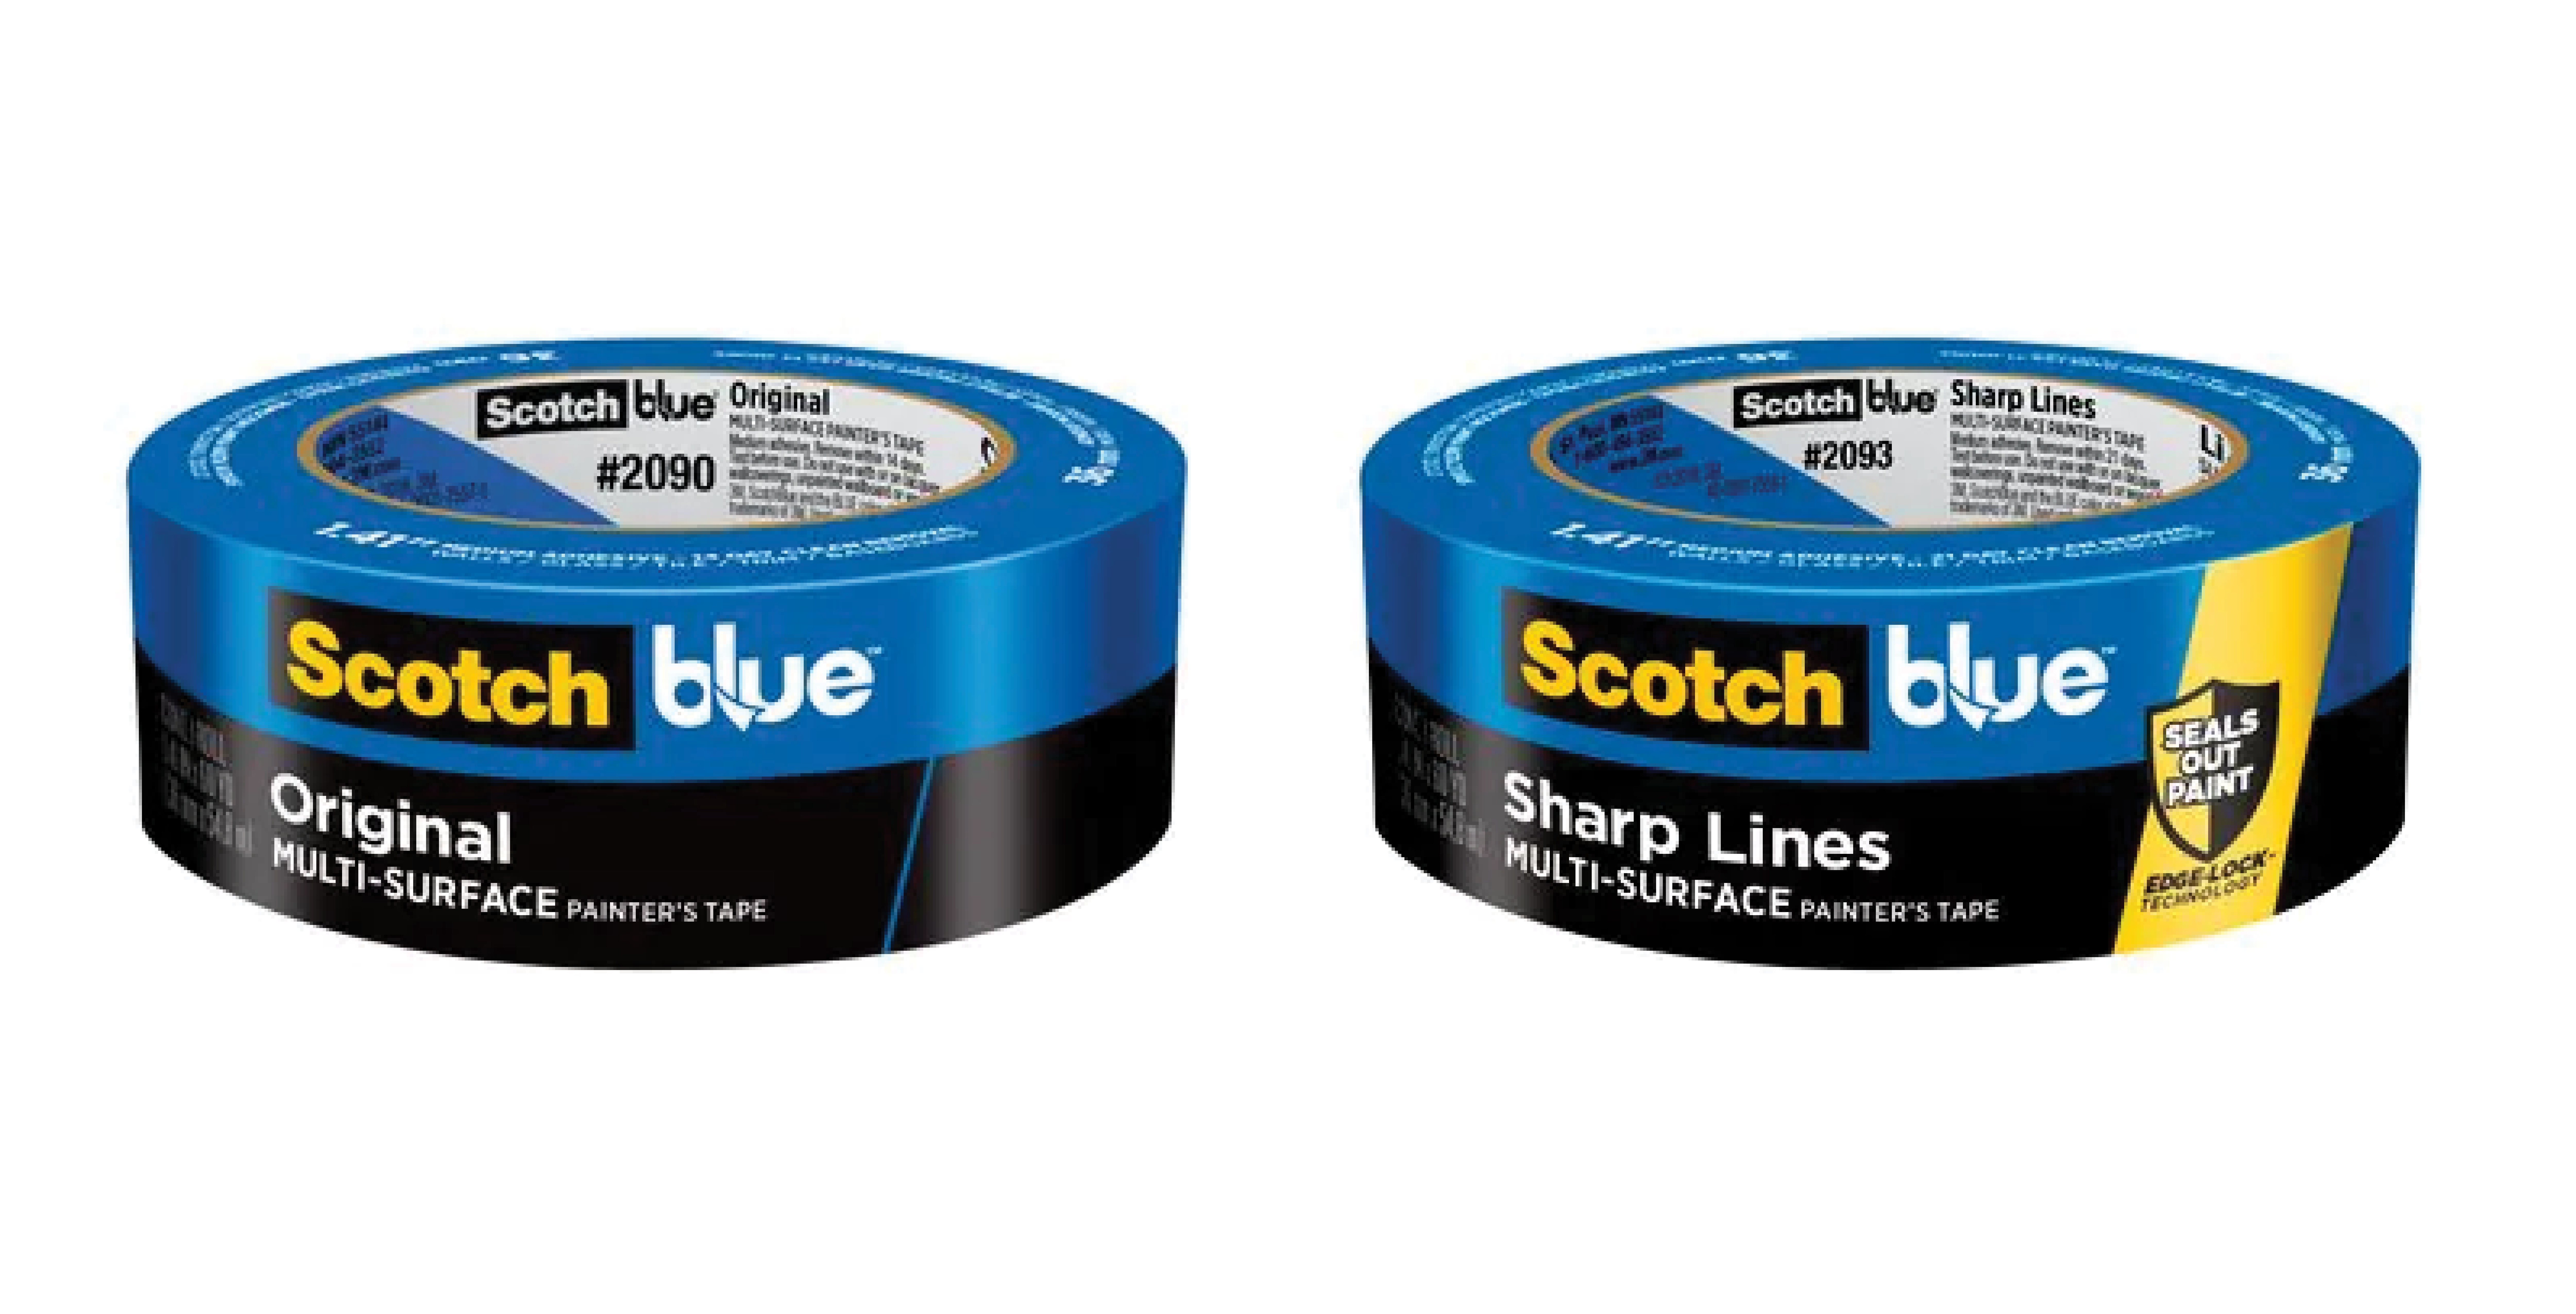 Choosing the Right Painter's Tape for the Job